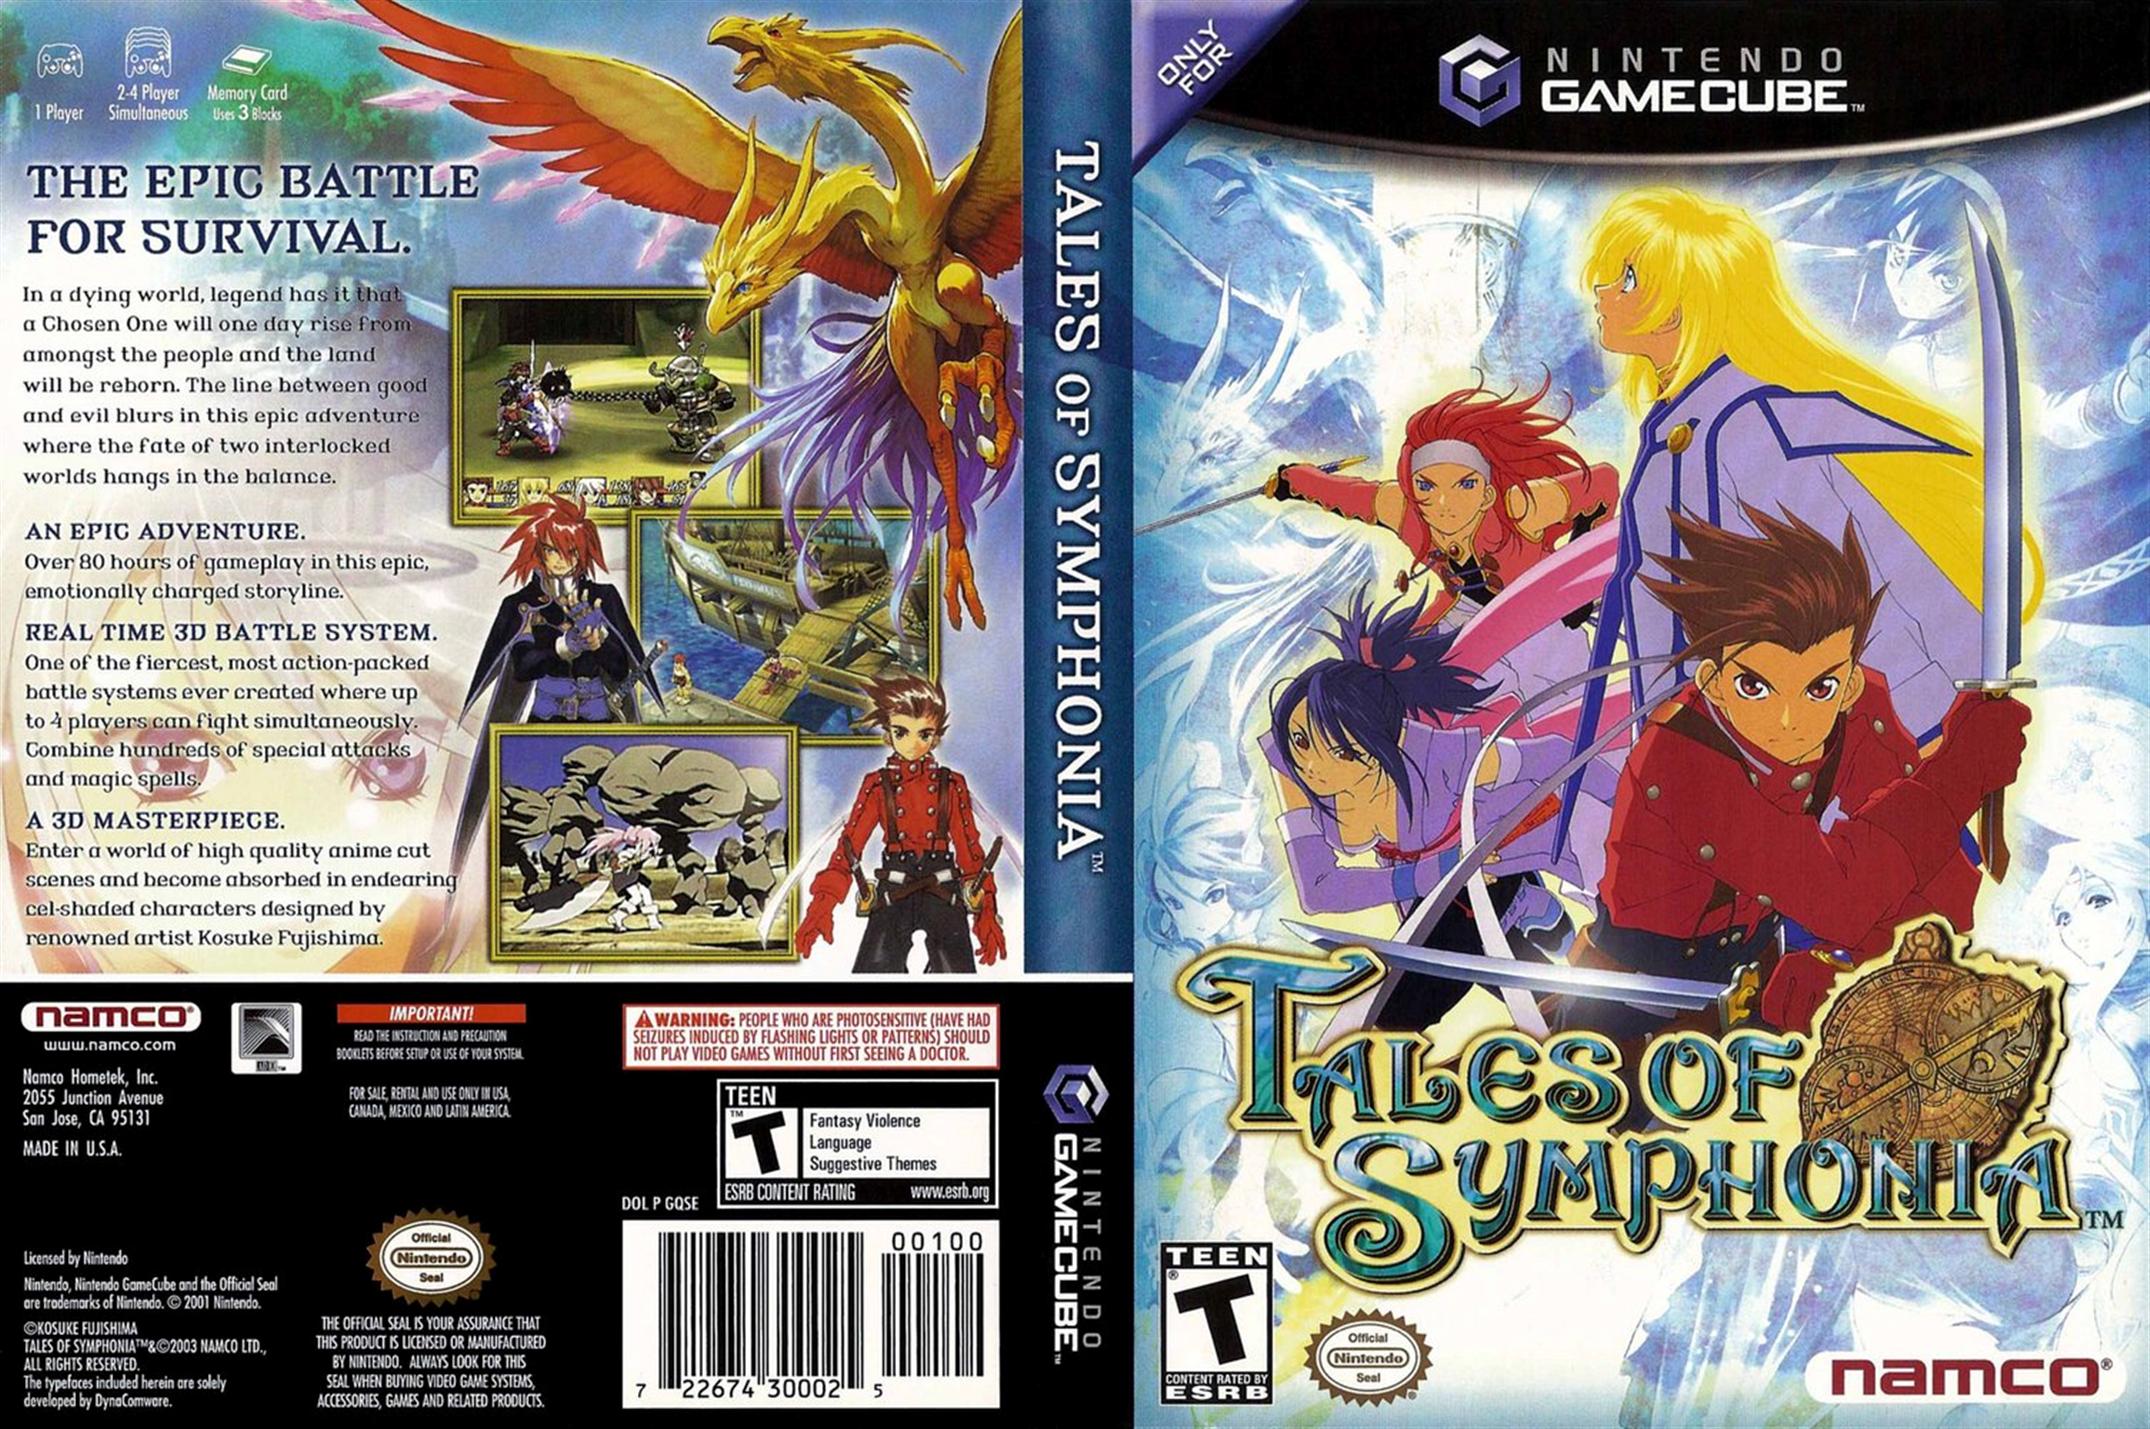 download tales of symphonia gamecube iso torrent